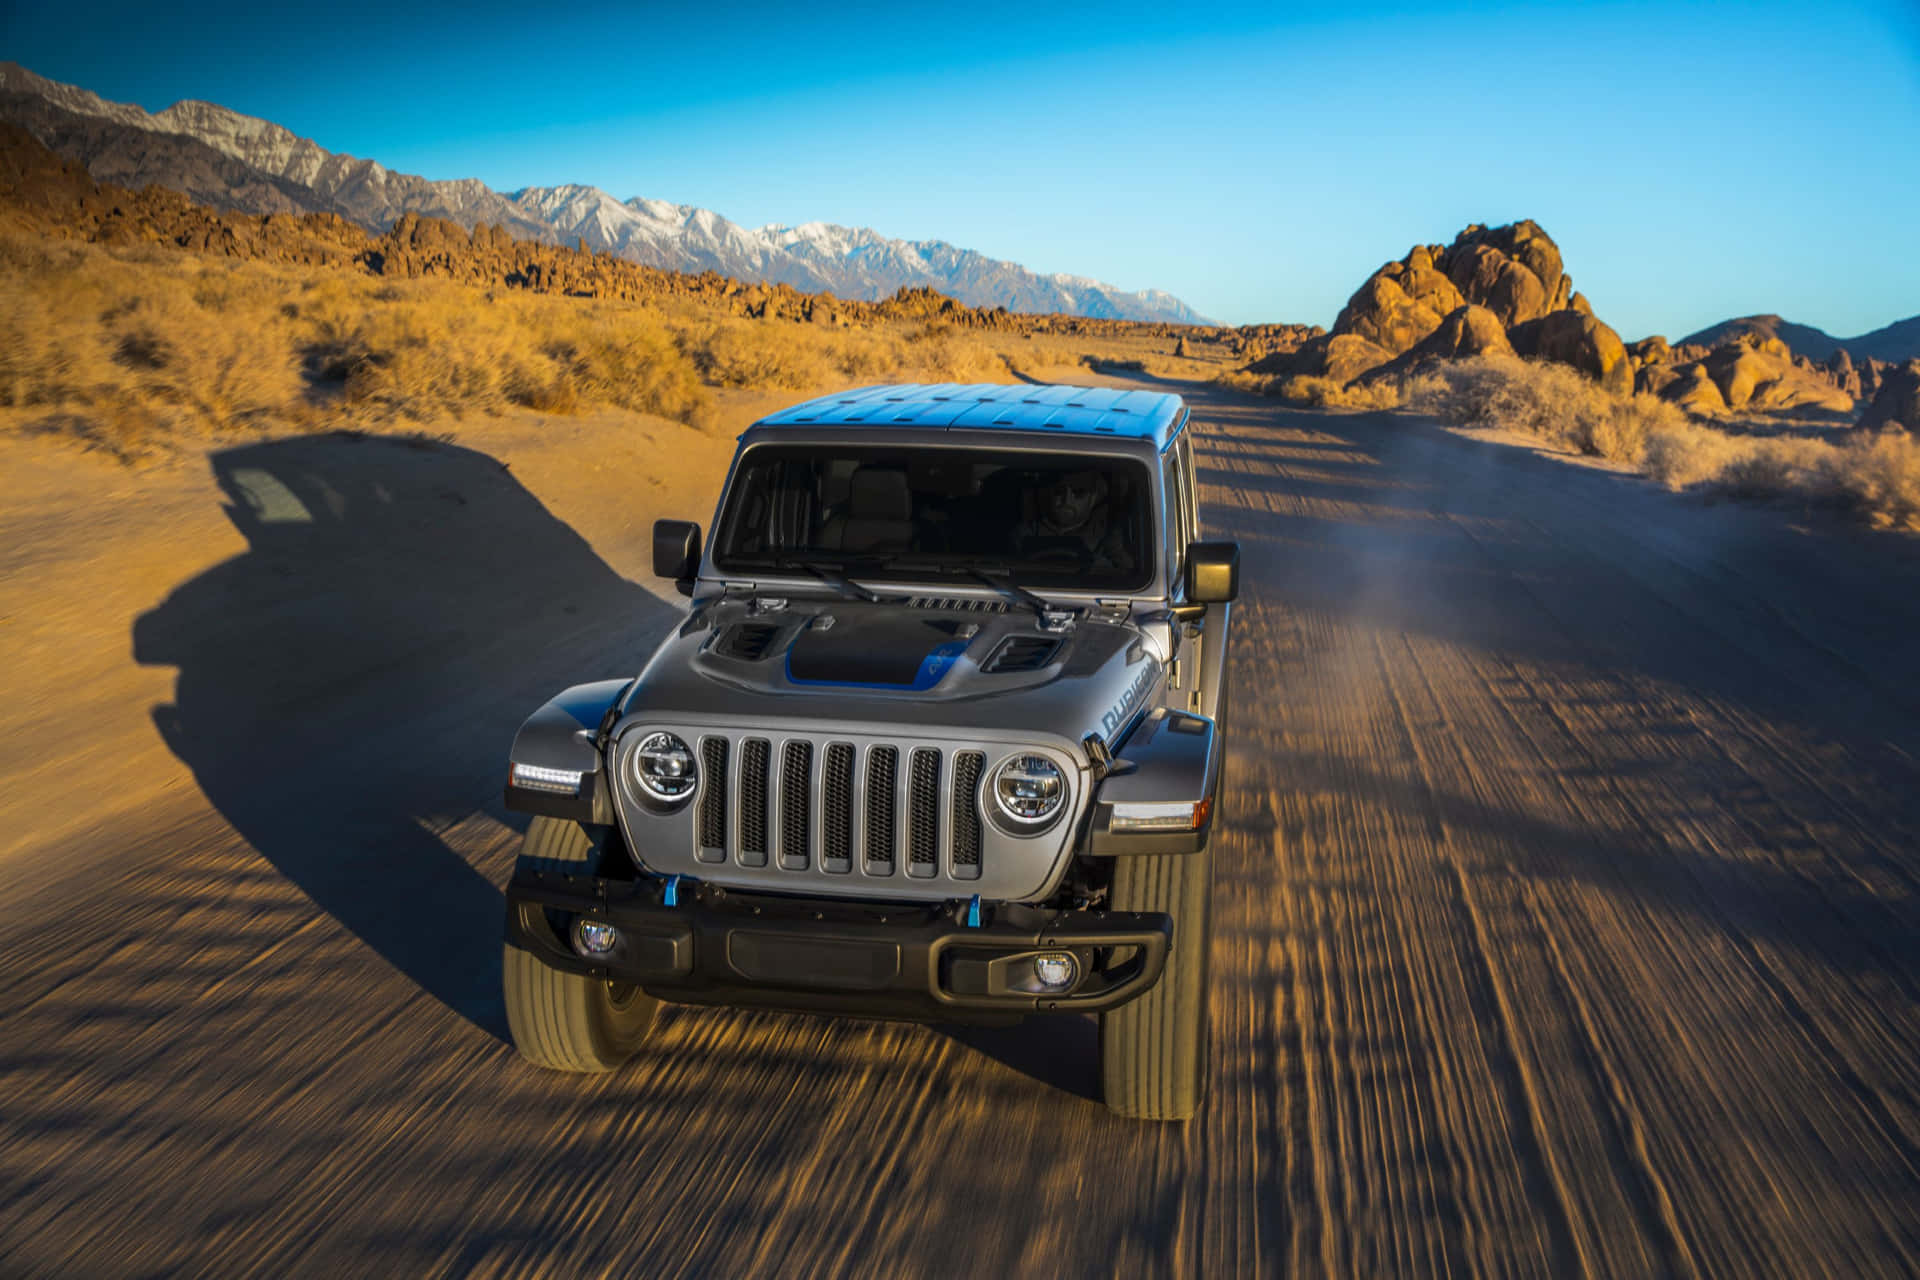 "Explore like never before in a Jeep!"